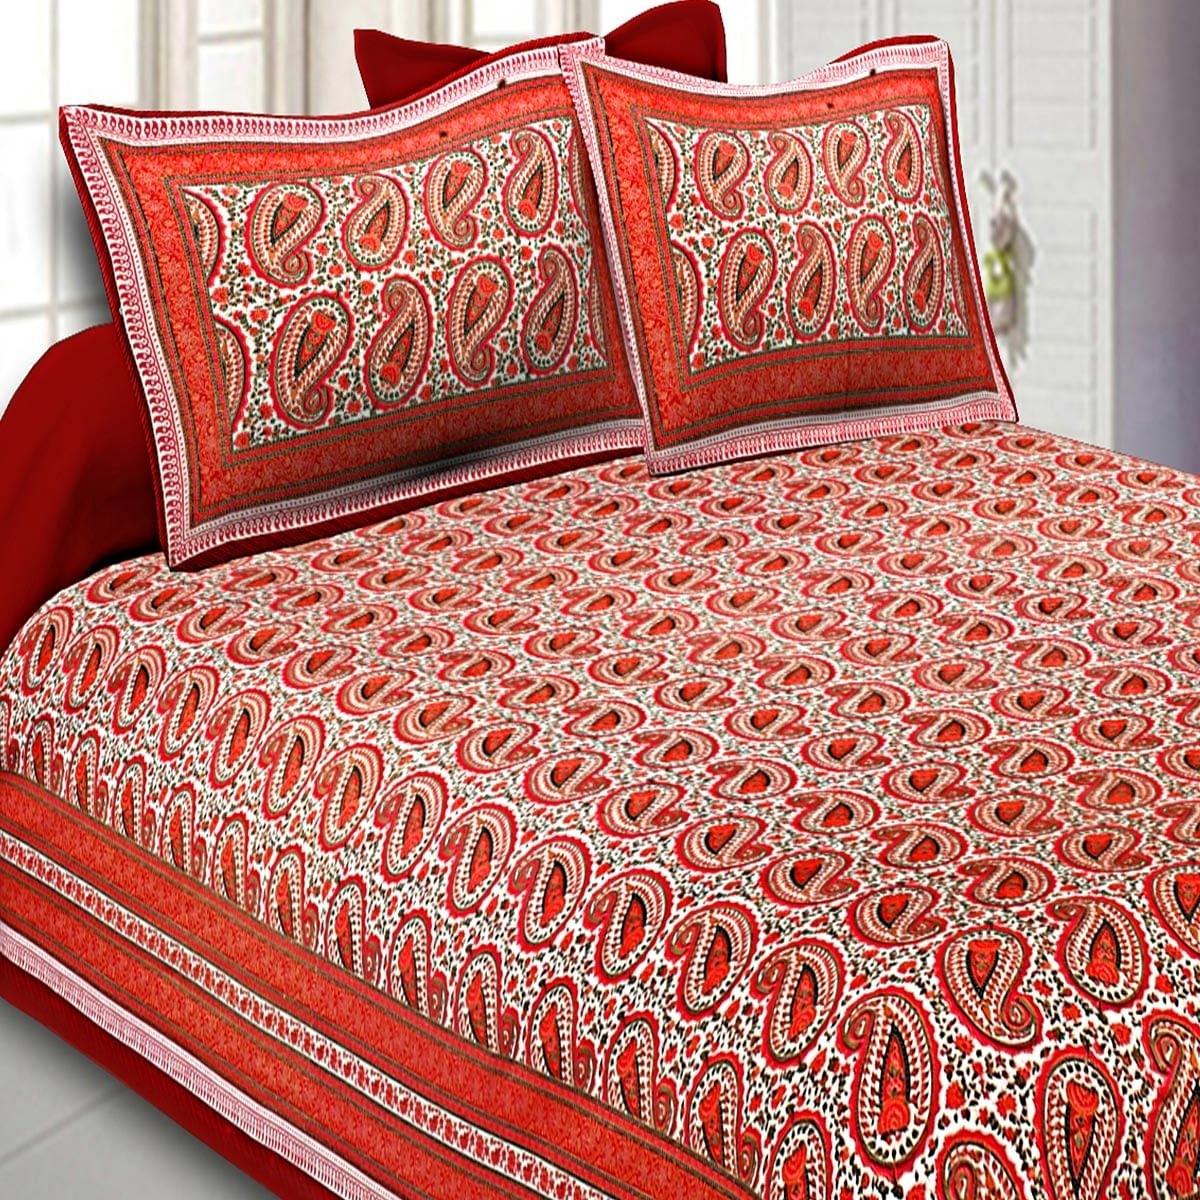 Buy desirable orange colored paisley gold printed cotton